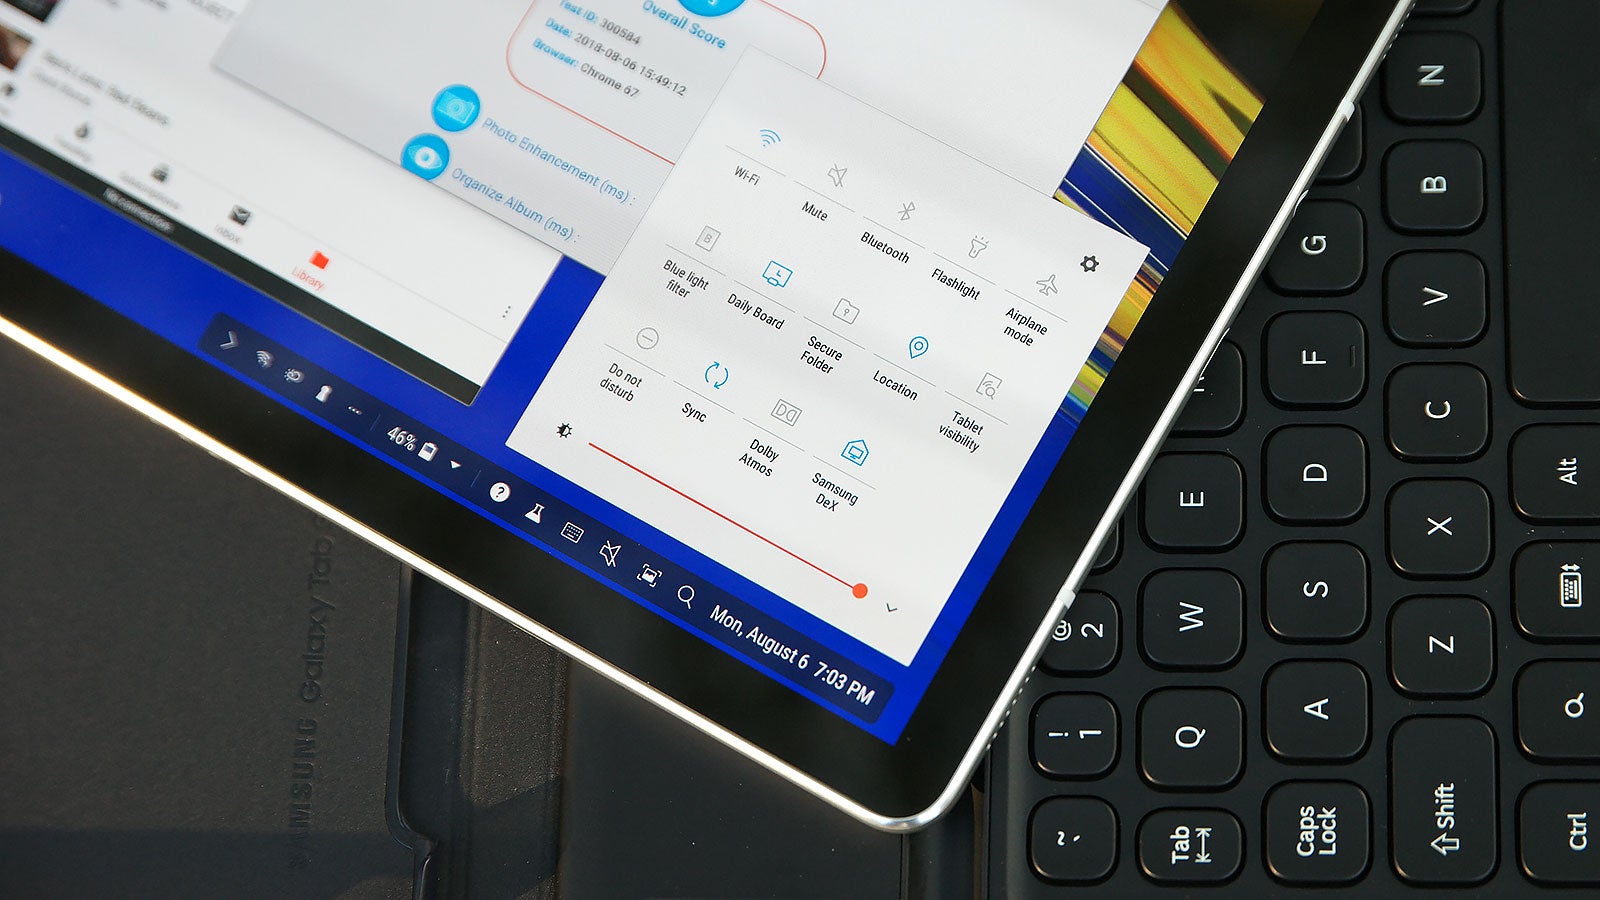 How Two Big Things Stopped The Samsung Galaxy Tab S4 From Winning